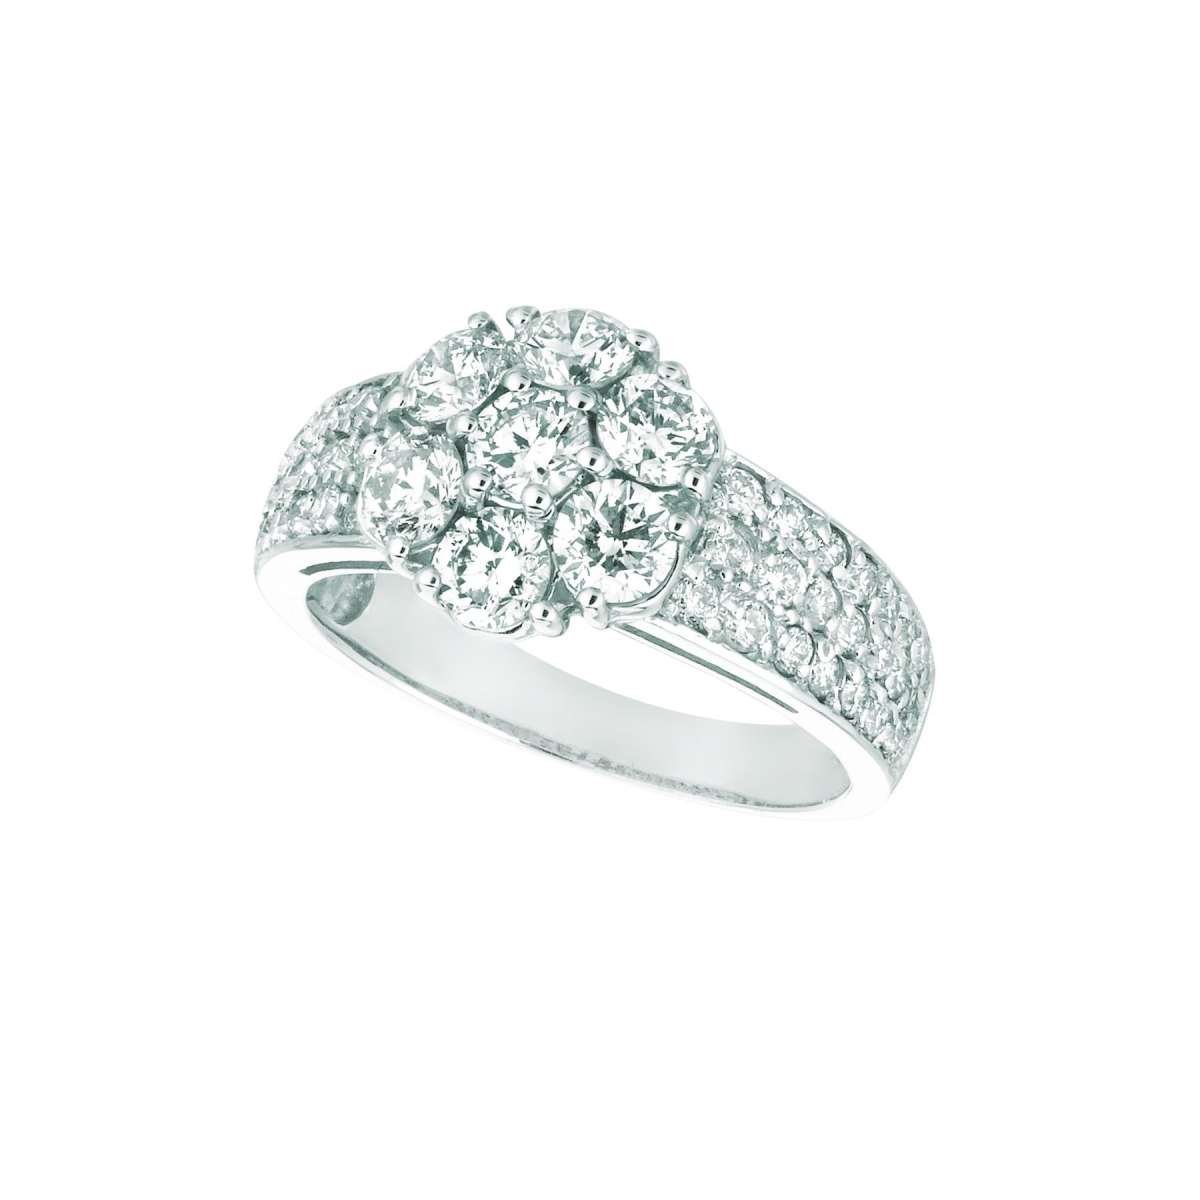 Picture of Harry Chad Enterprises 17971 2 CT 14K White Gold Diamond Flower Fancy Ring with Accents, Size 6.5